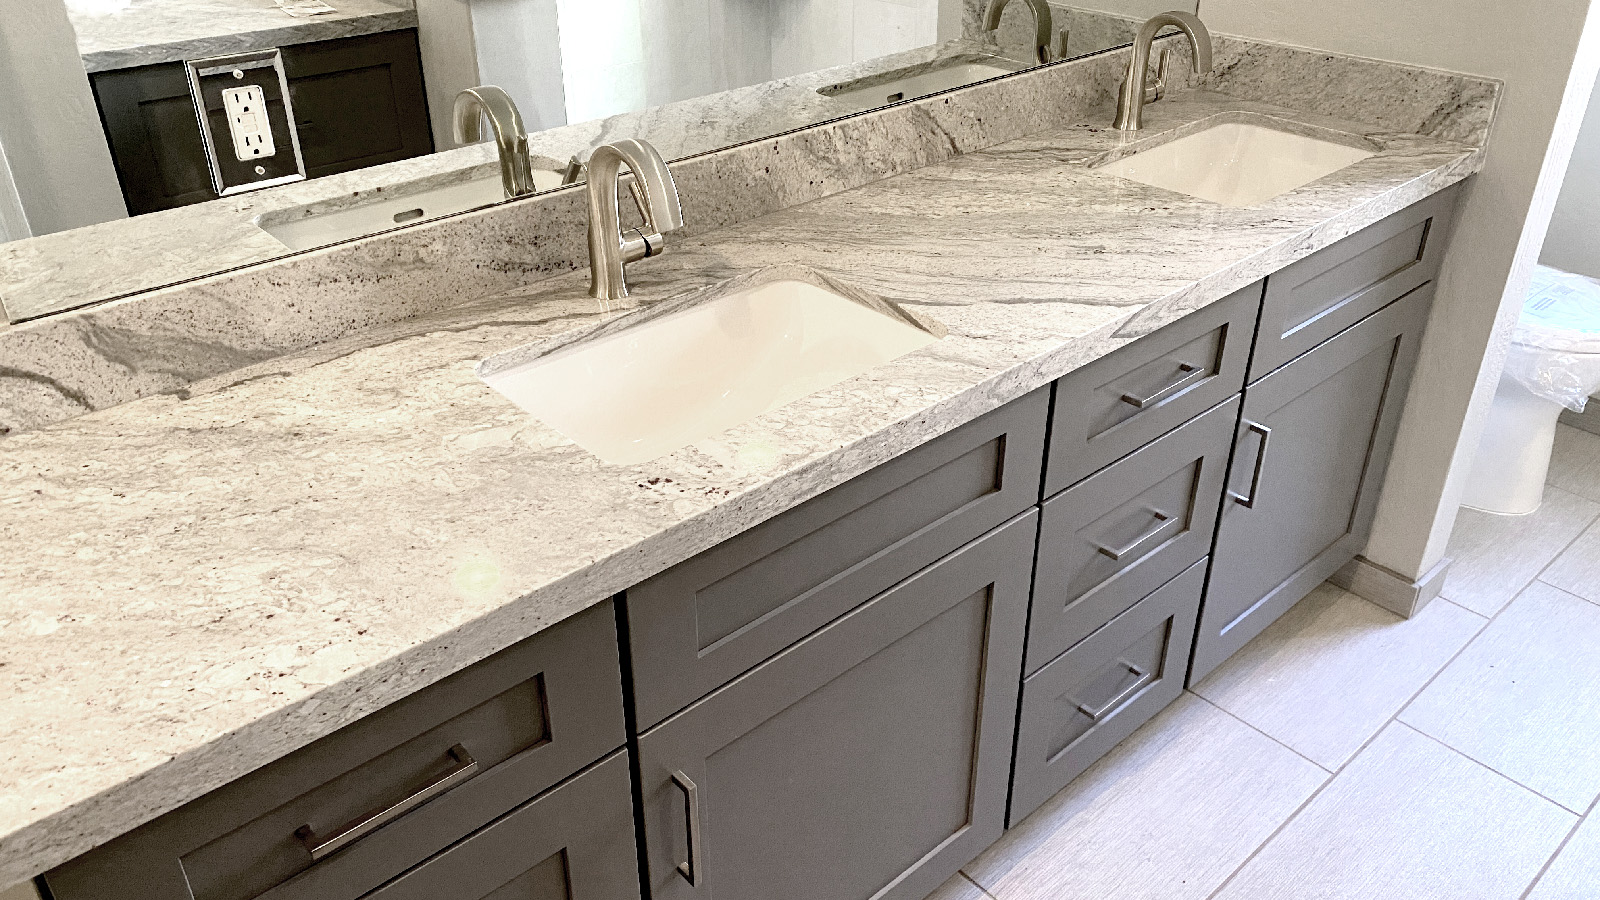 Master bathroom cabinets and countertops